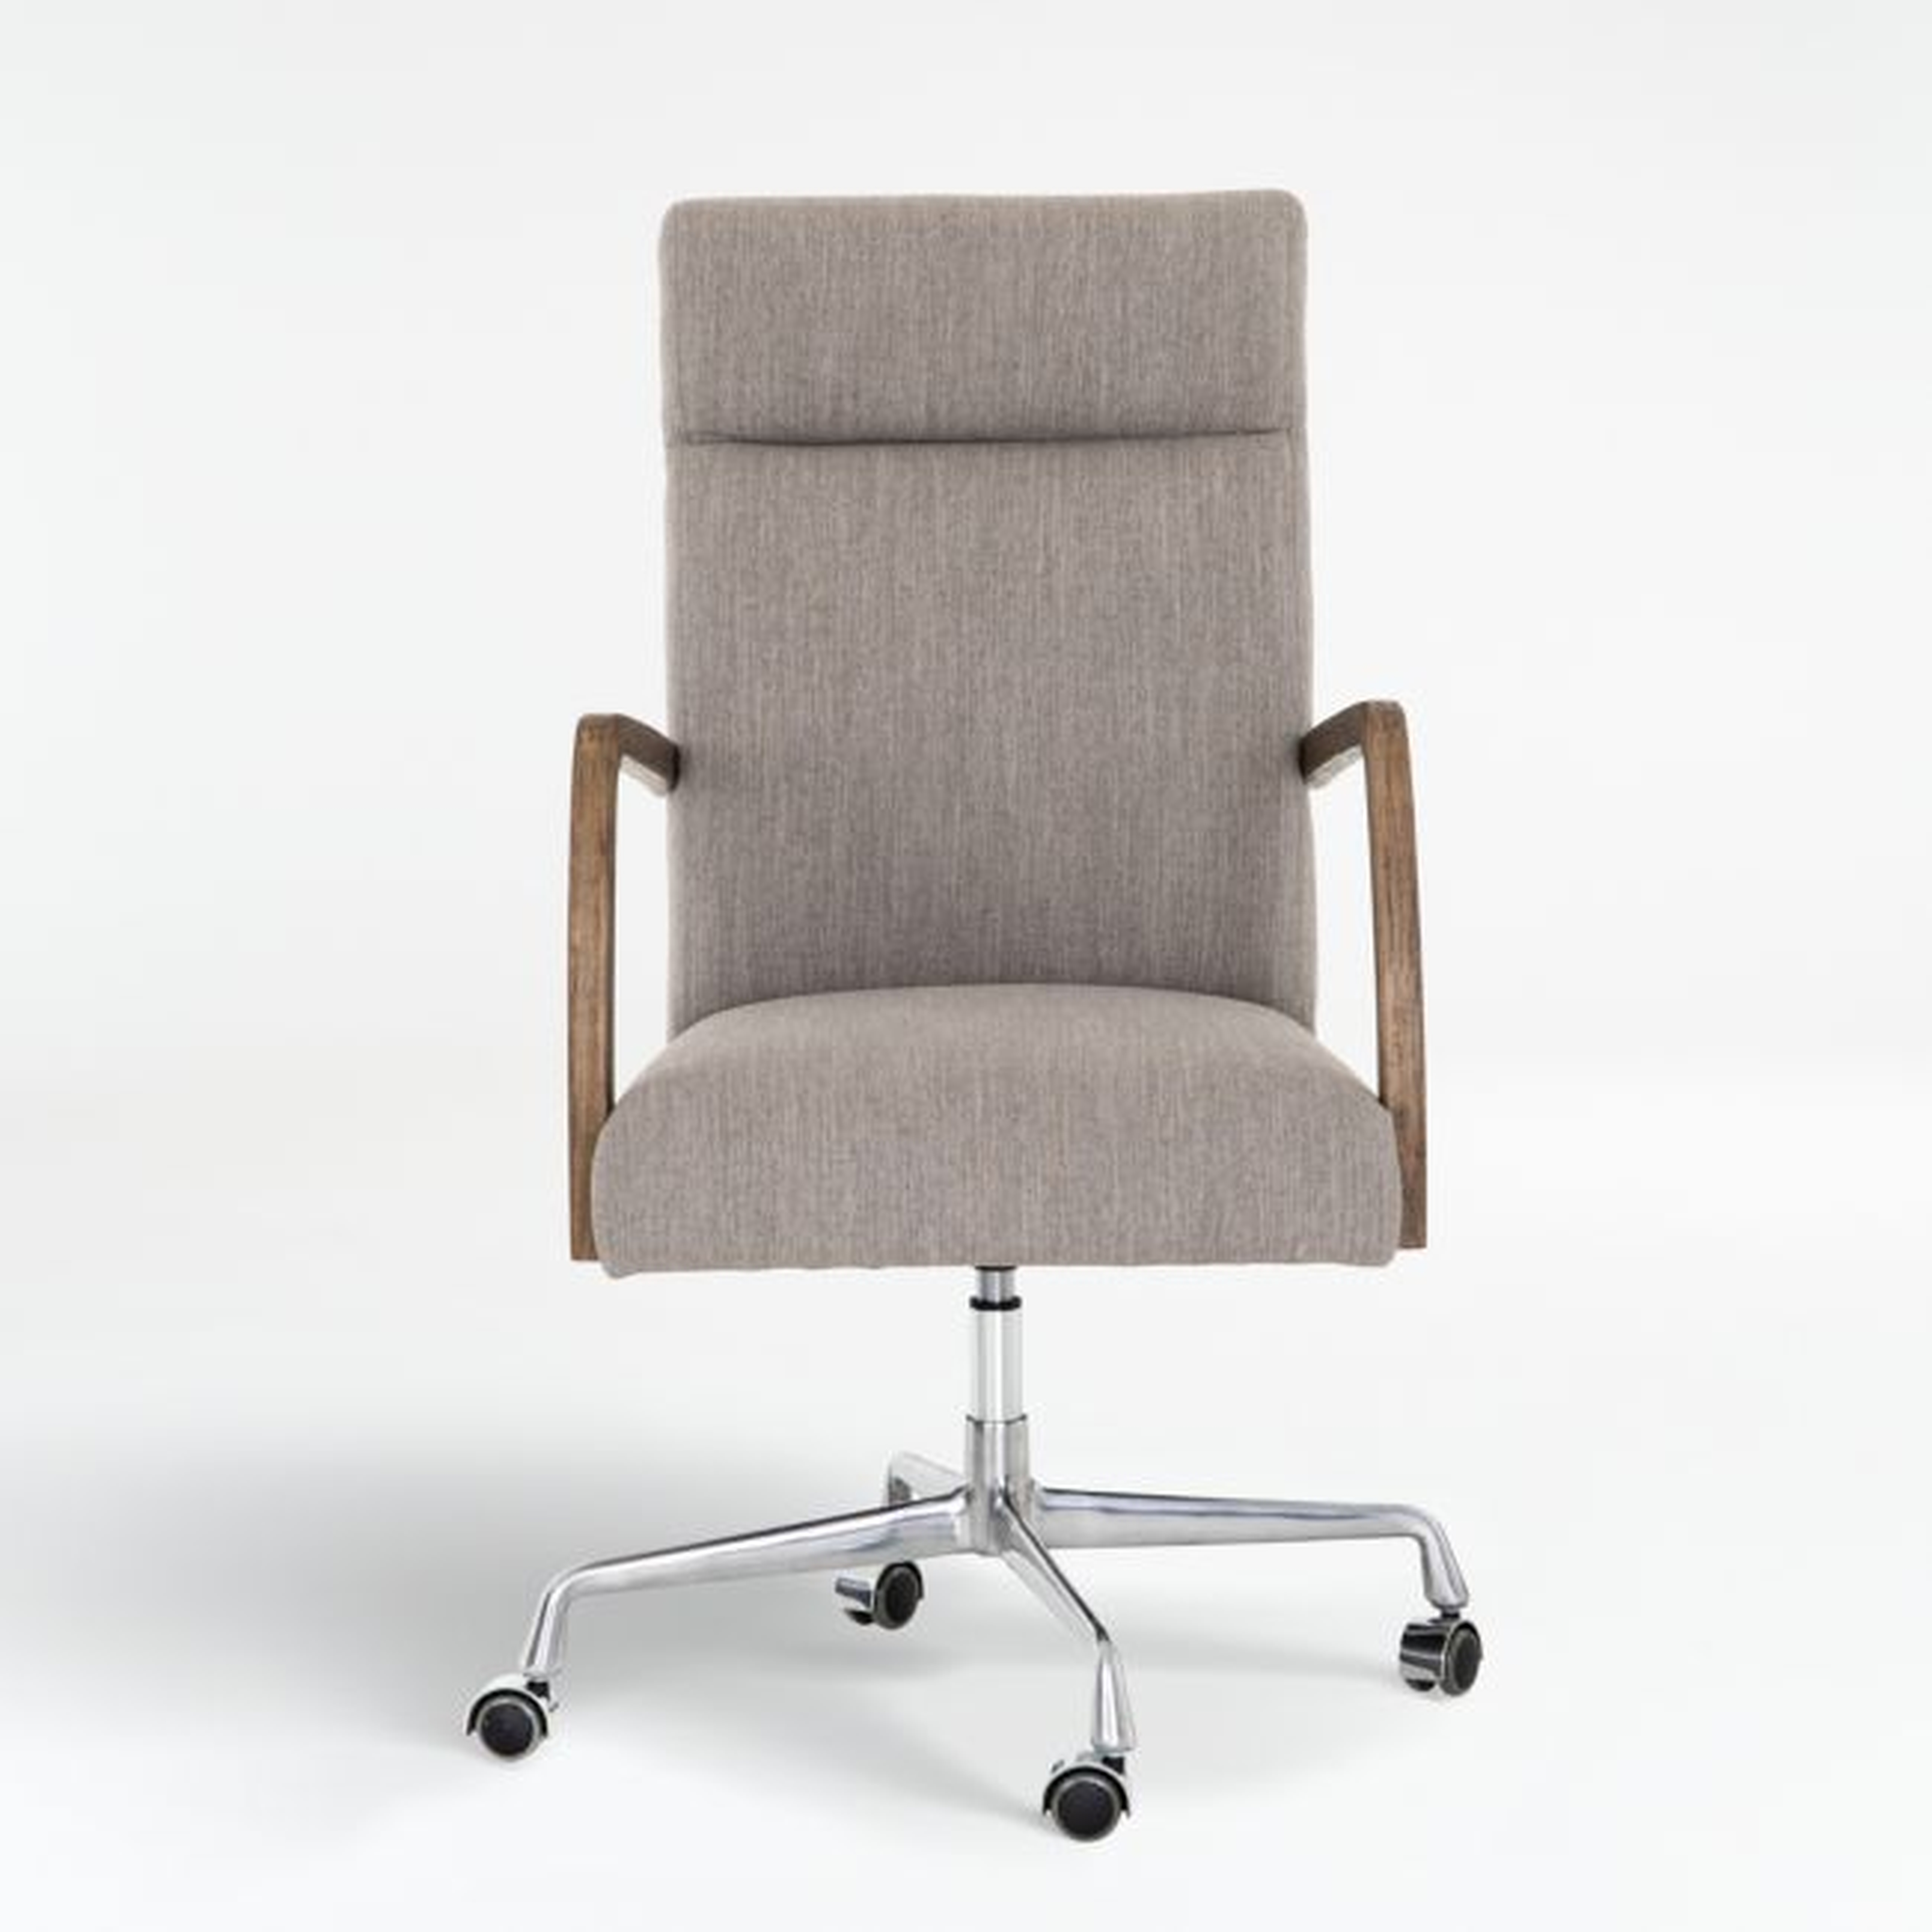 Cermak Office Chair - Crate and Barrel